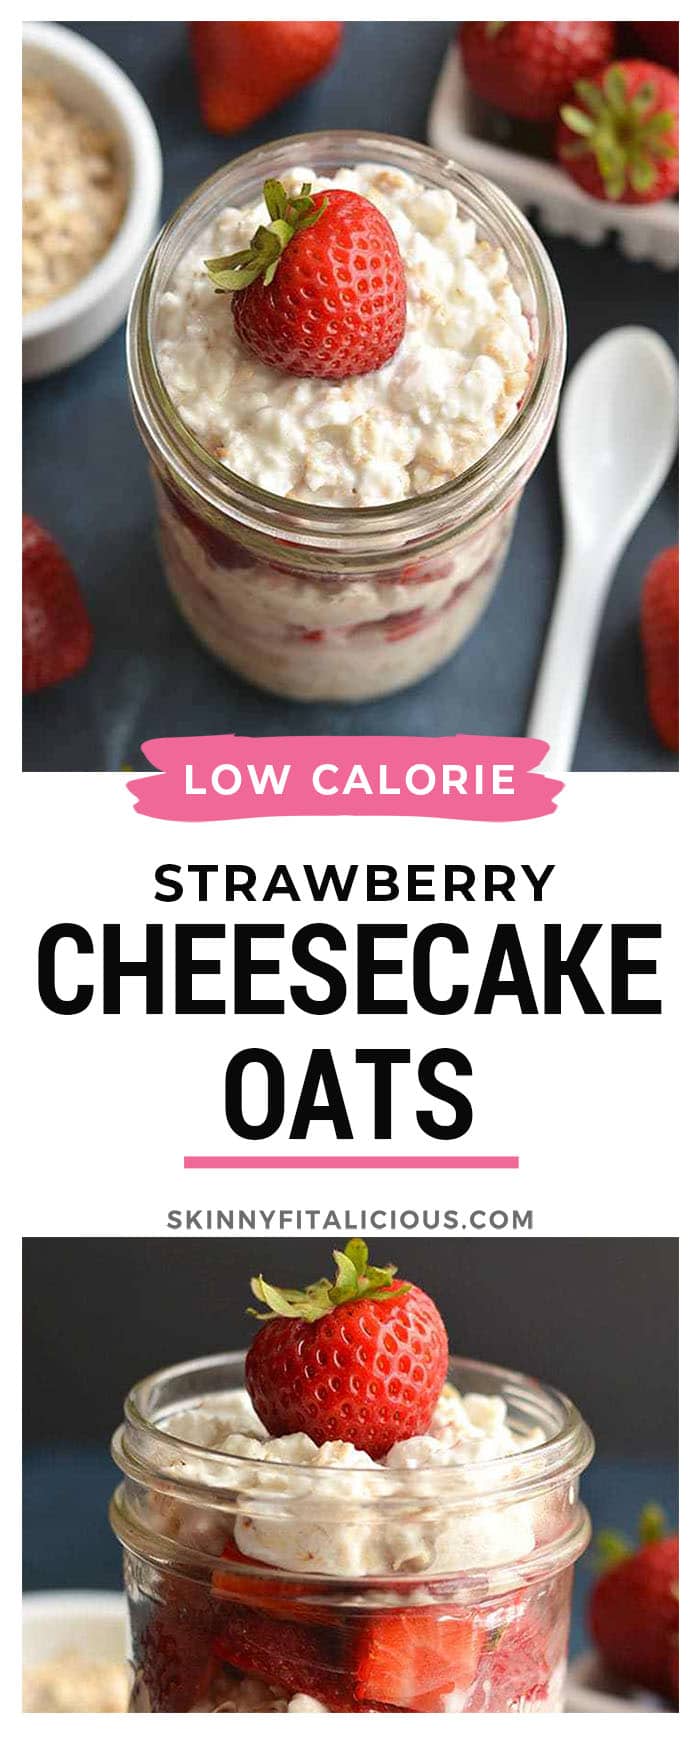 Nothing like cheesecake for breakfast! This Strawberry Cheesecake Overnight Oats recipe is prepped in less than 5 minutes so you can have a healthy, egg-free breakfast ready to go every morning!